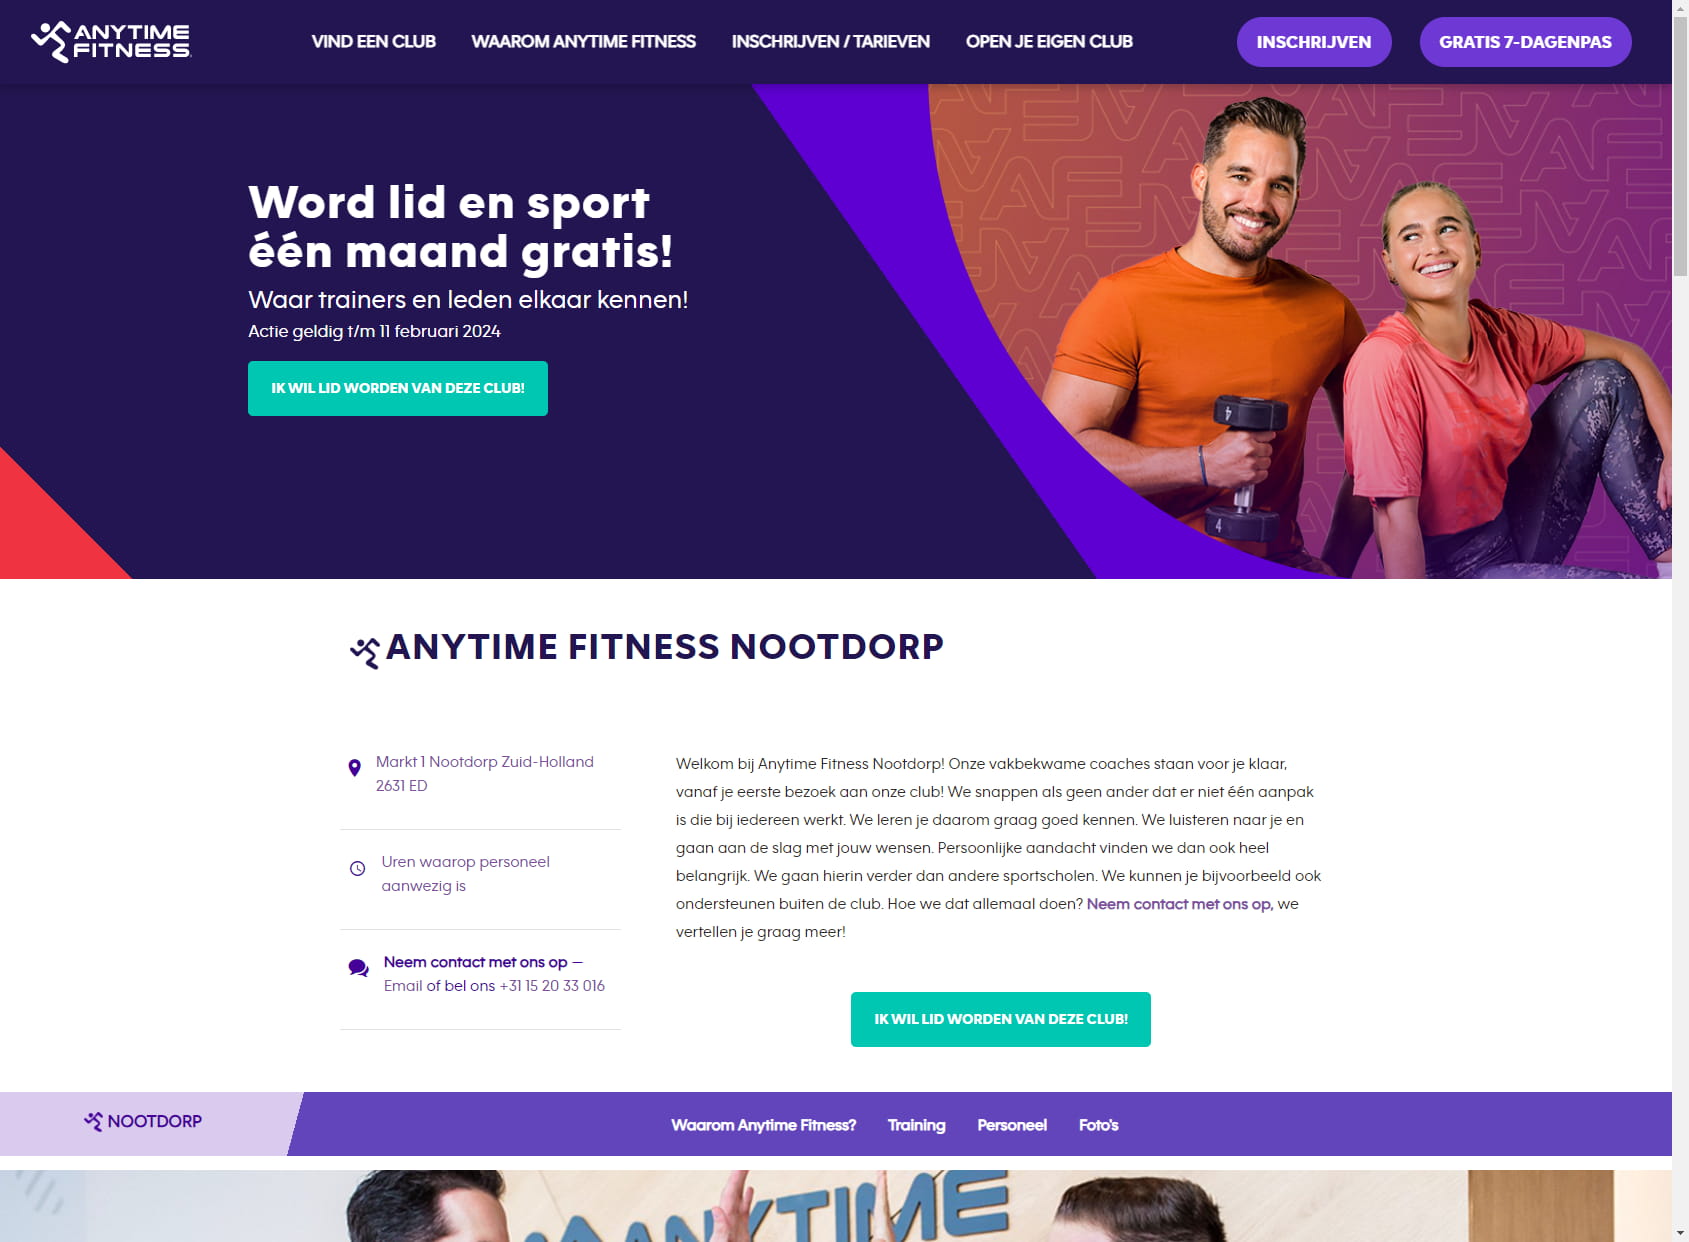 Anytime Fitness Nootdorp